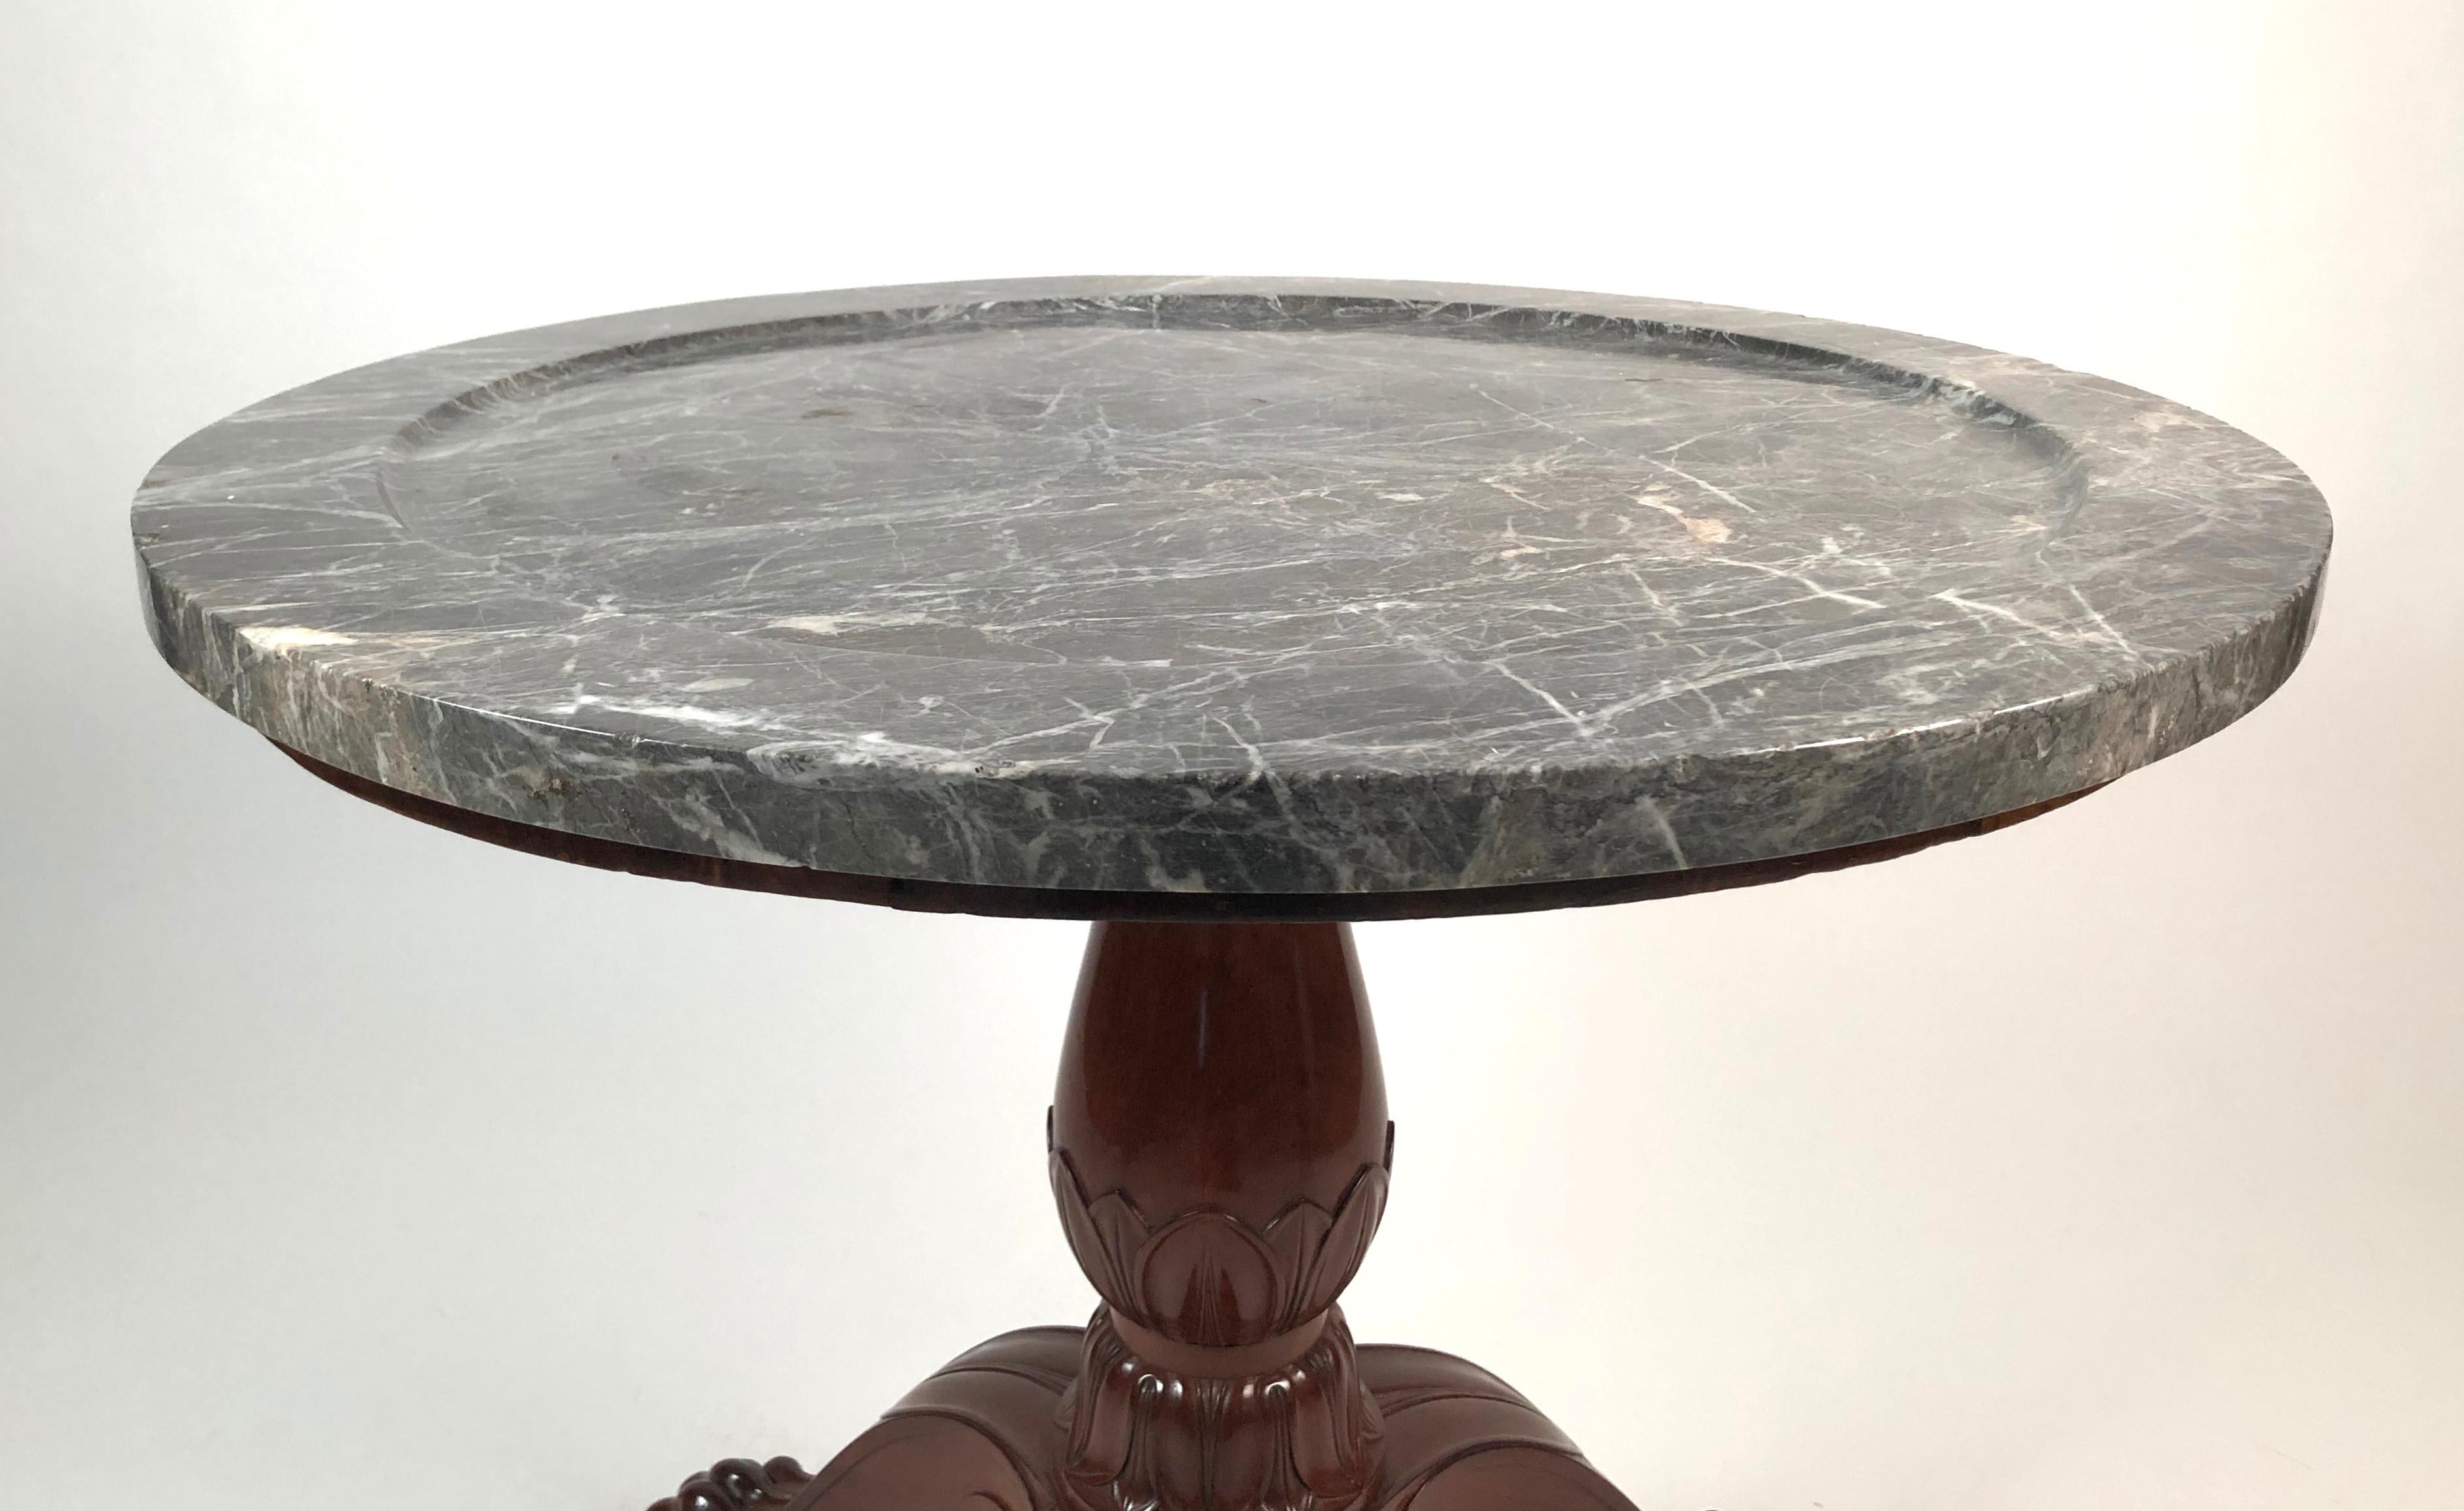 A fine quality, wonderfully bold and well proportioned French Empire period table with carved marble top over a baluster-form pedestal with finely carved lotus leaves over a tripod base with carved lotus leaves and boldly carved animal paw feet. The